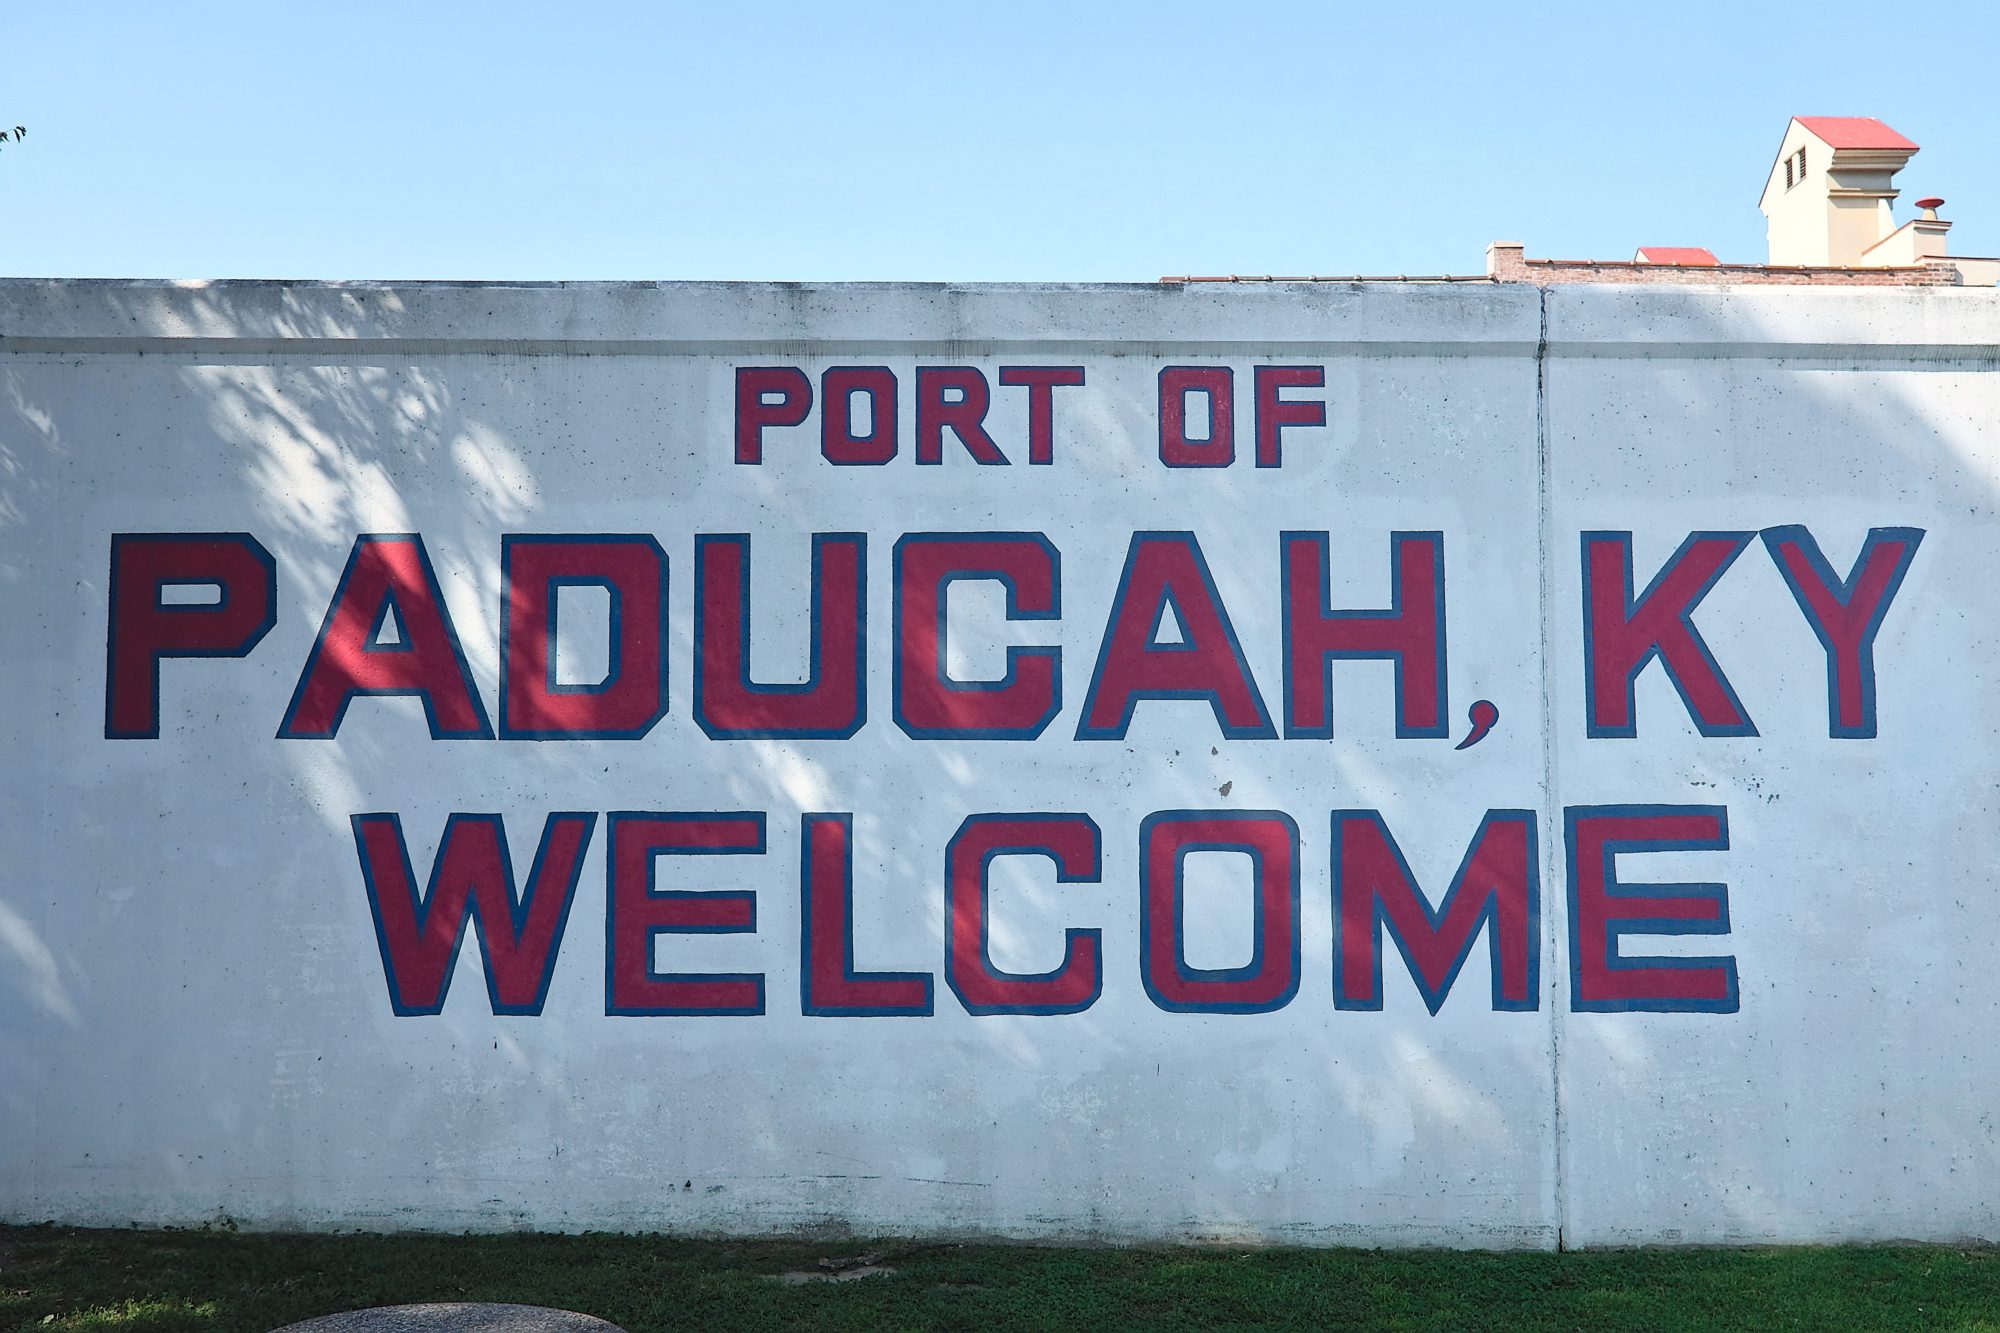 The Paducah flood wall is painted to read "Port of Paducah, KY - Welcome"